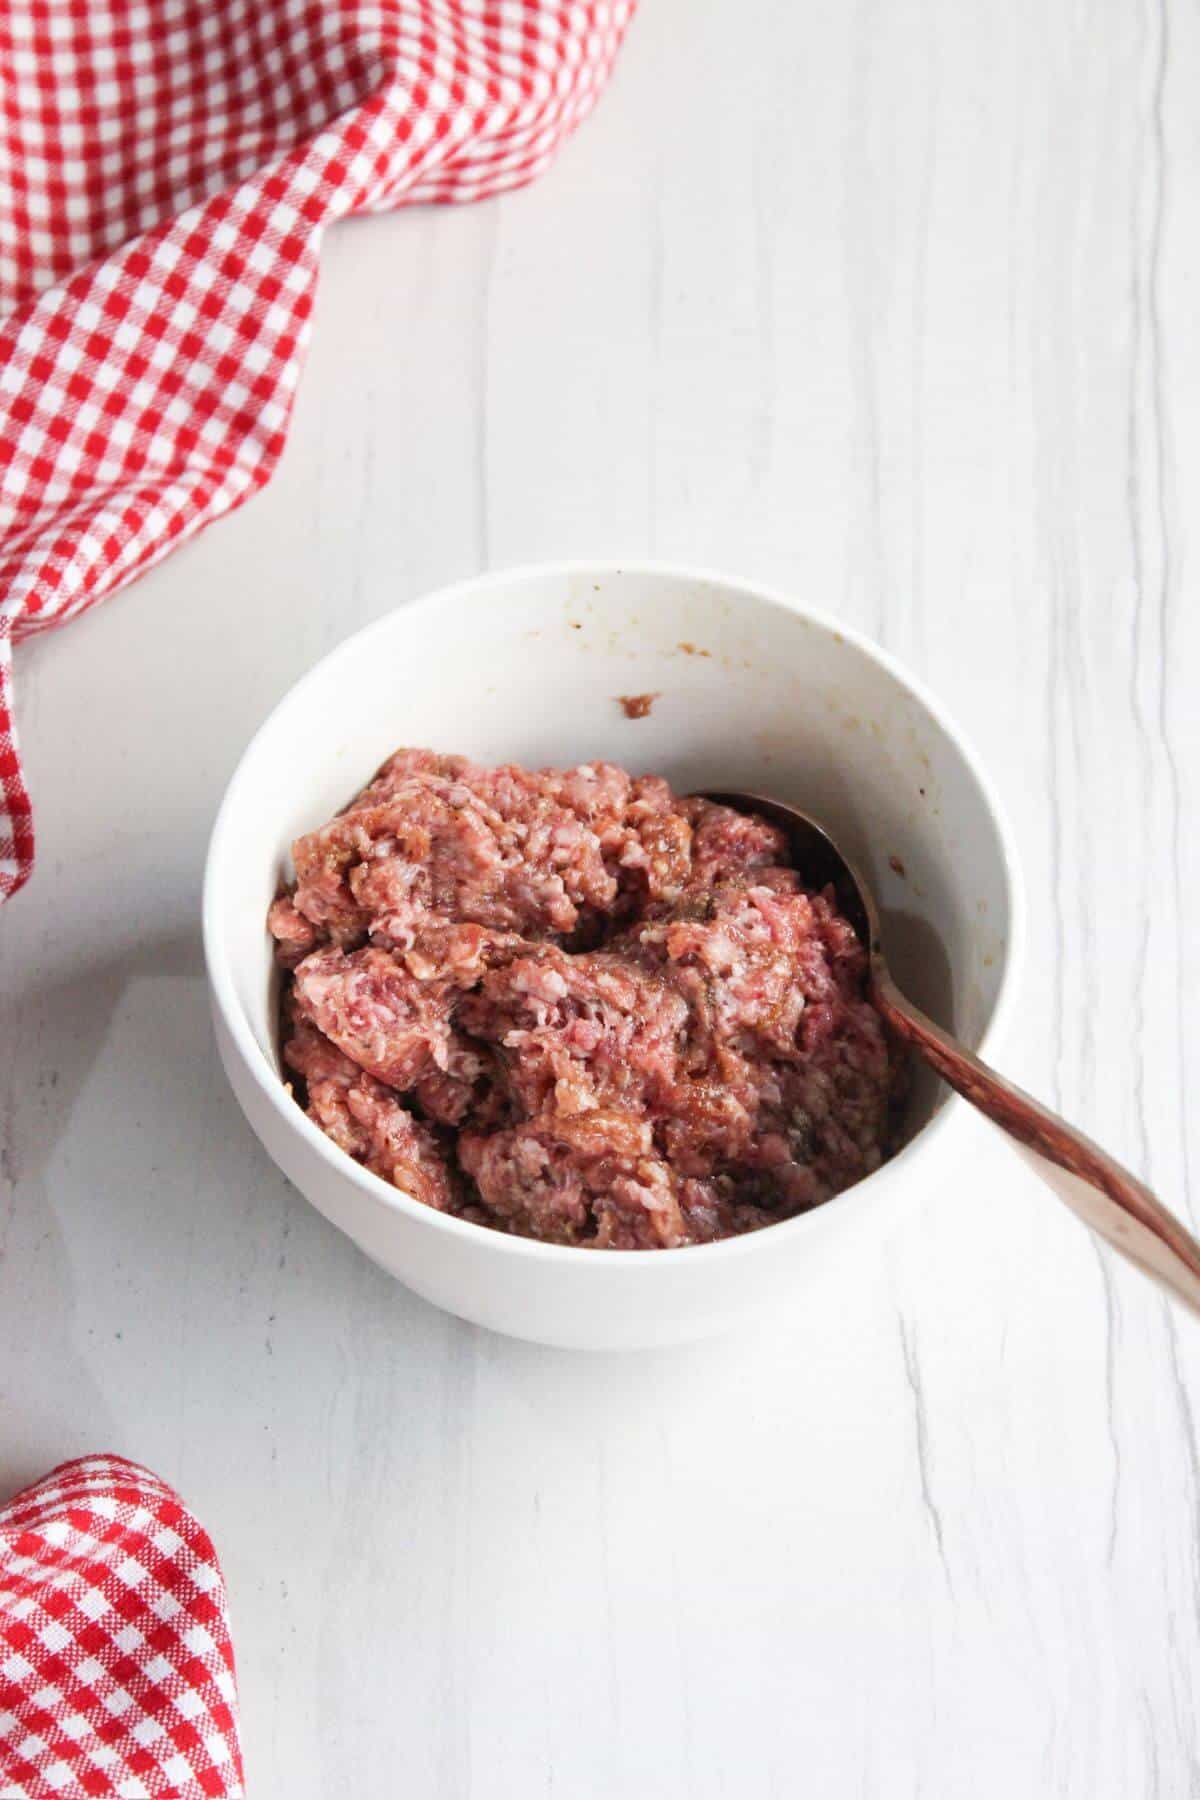 A bowl of seasoned ground pork in a red and white checkered tablecloth.